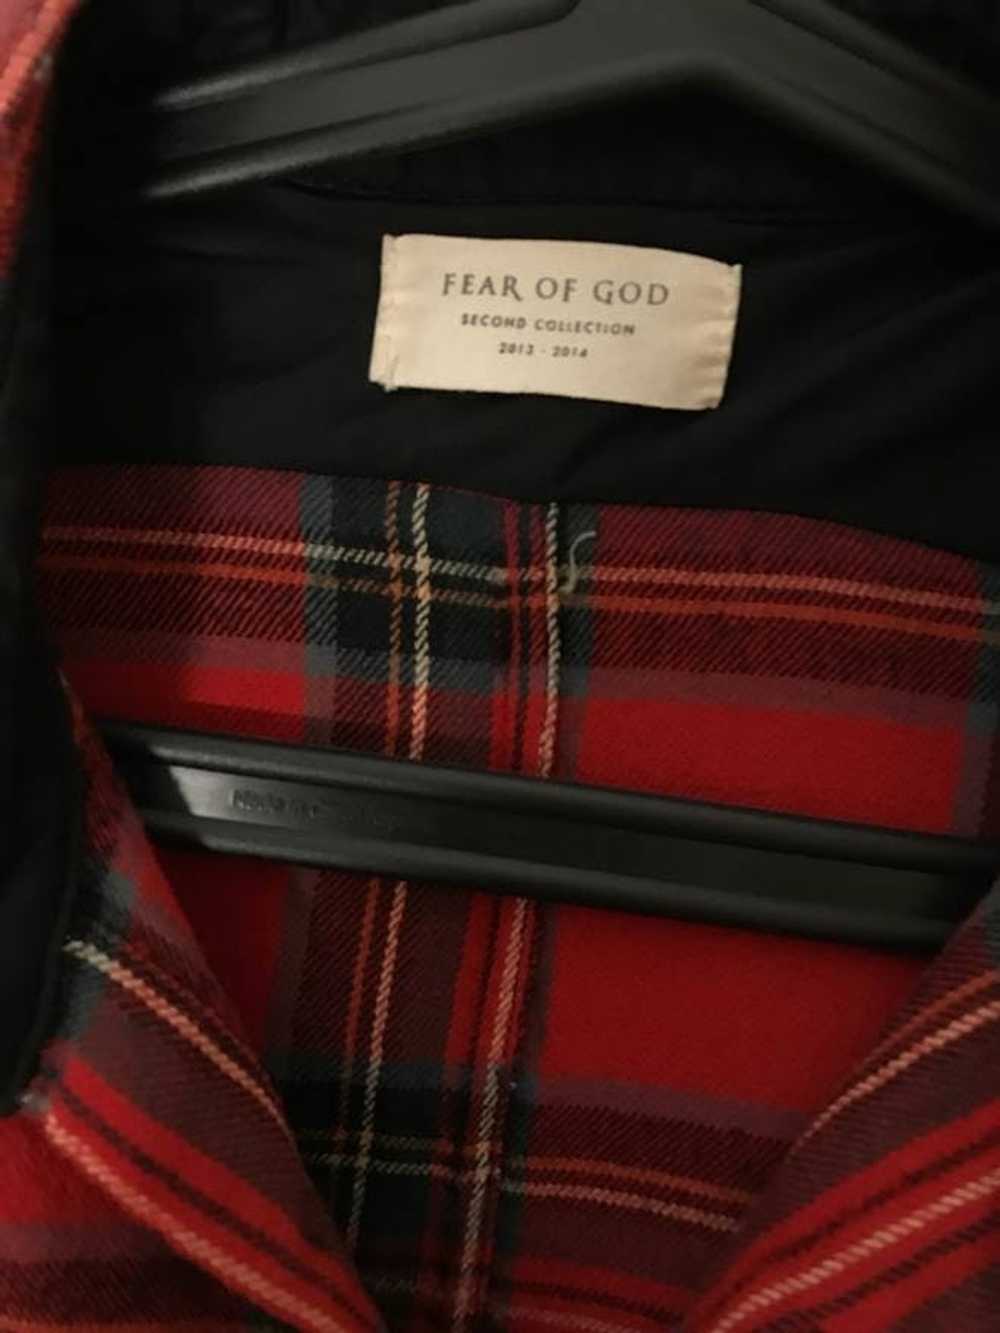 Fear of God Red flannel 2nd Collection - image 2